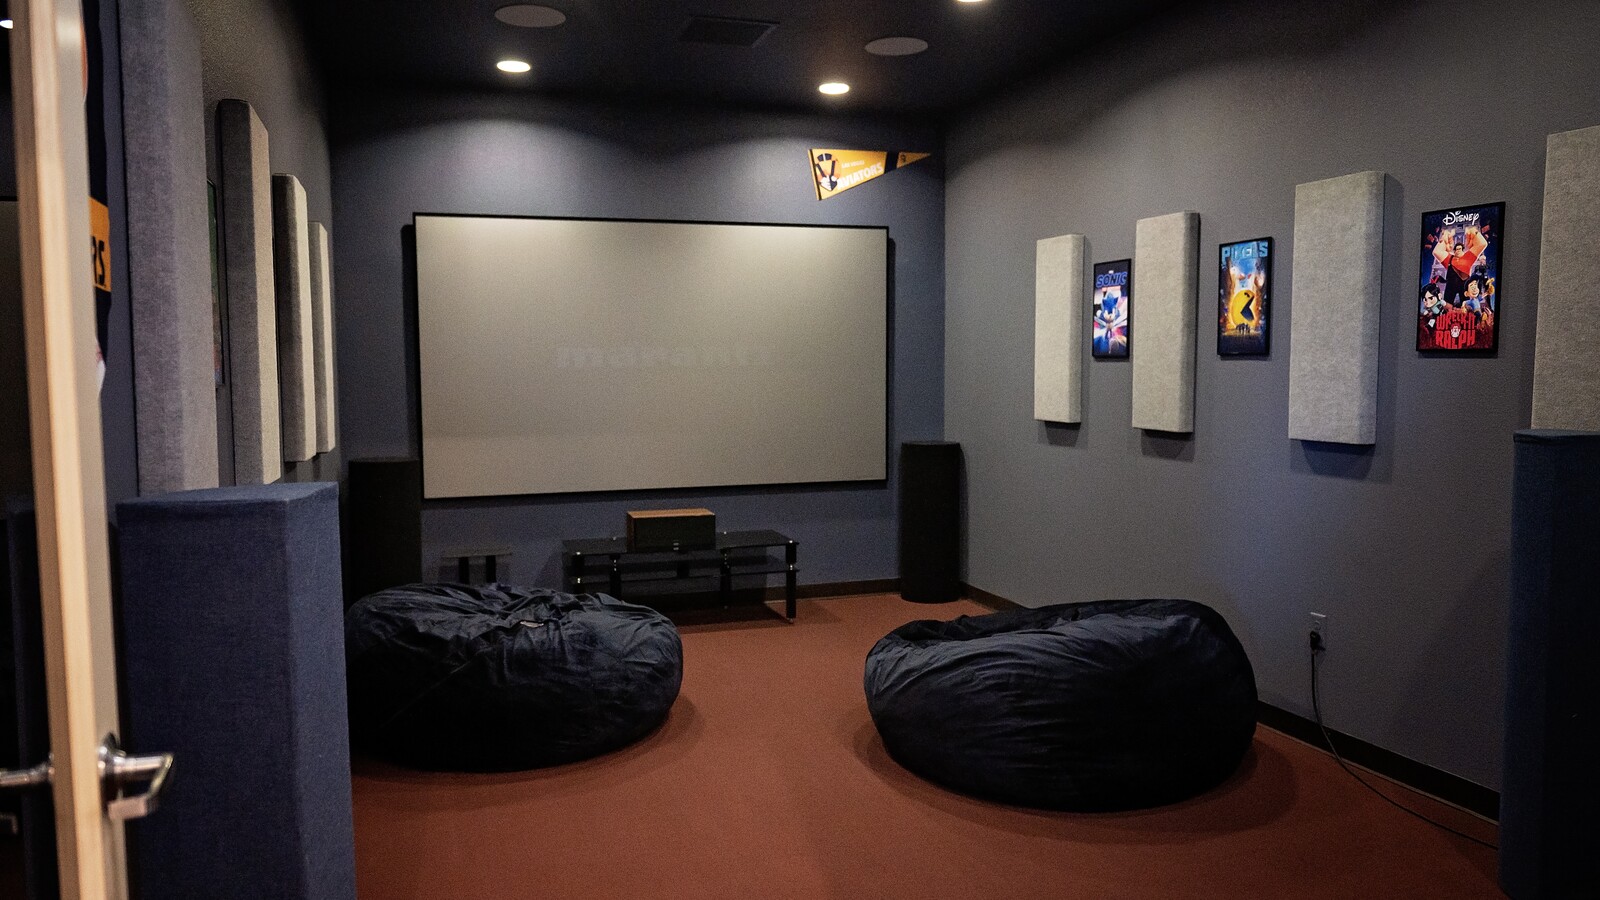 Indoor Cinema Package with Screen, Projector, Speaker, Disco Lights, Bean  Bags and Fairy Lights) - Party Equipment Hire in Buckinghamshire,  Berkshire, Oxfordshire, High Wycombe, Beaconsfield, Marlow